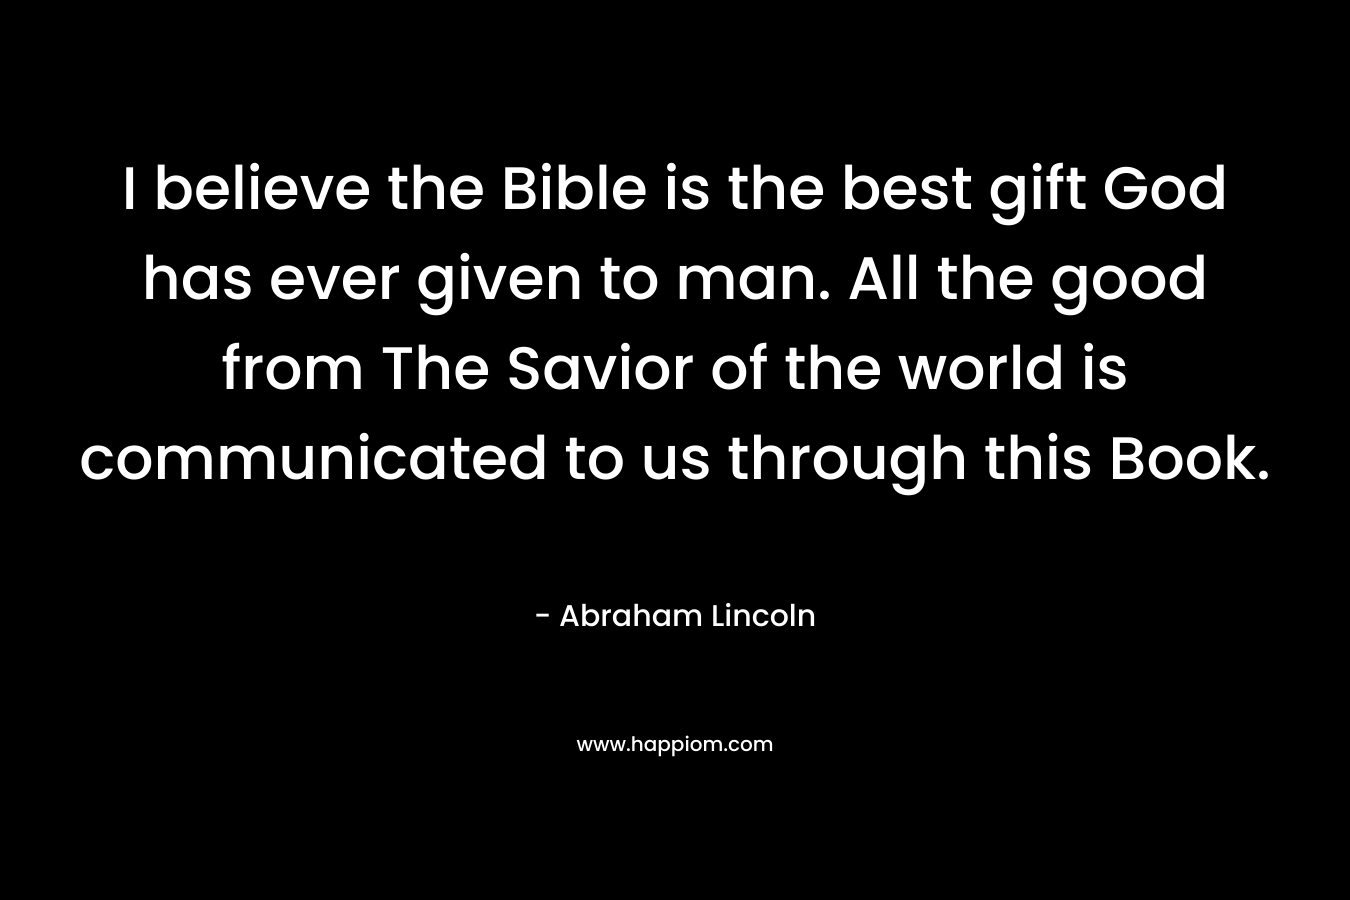 I believe the Bible is the best gift God has ever given to man. All the good from The Savior of the world is communicated to us through this Book. – Abraham Lincoln